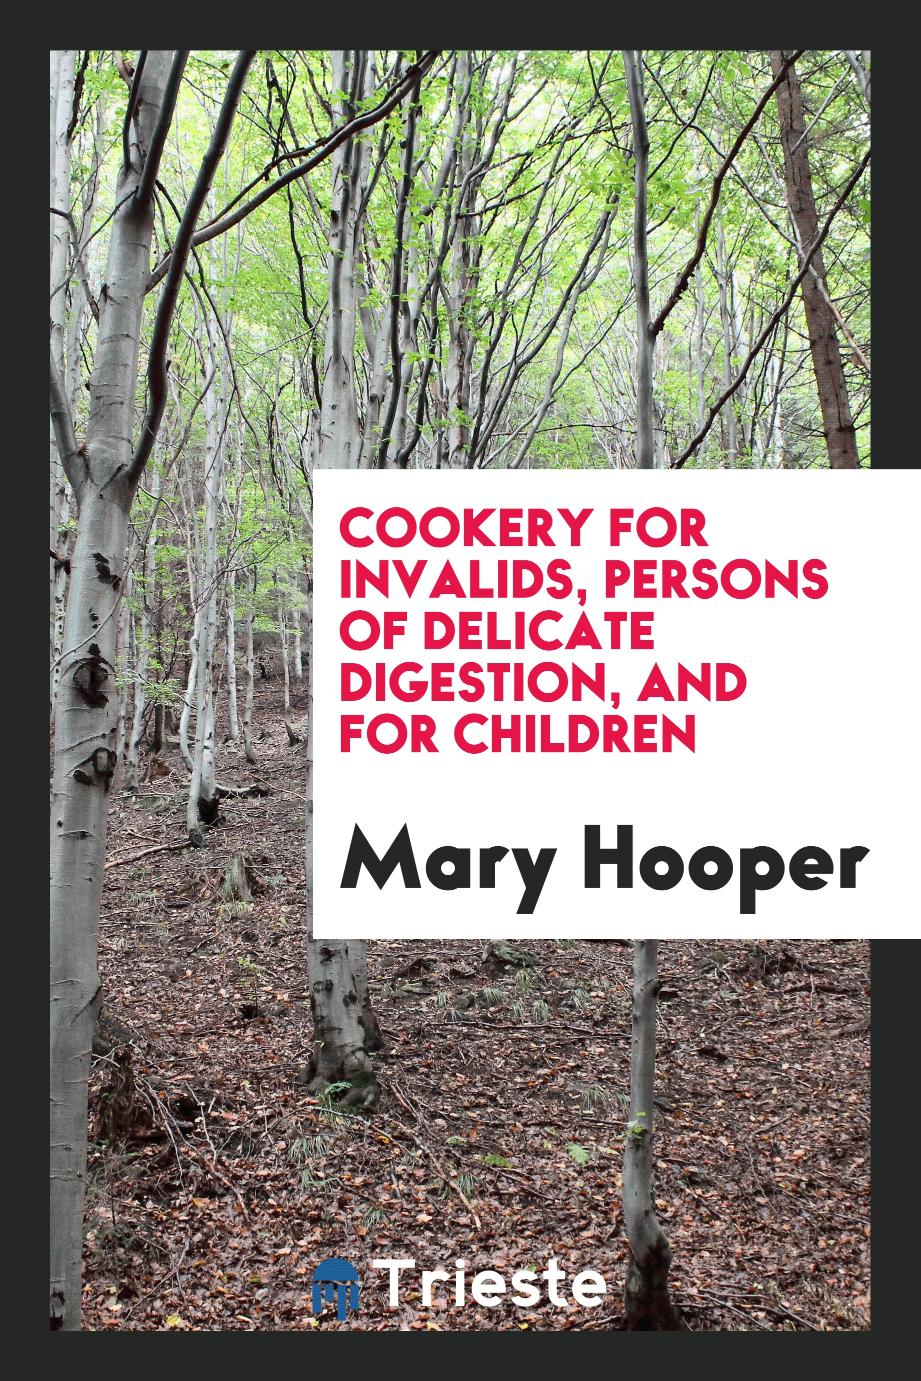 Cookery for invalids, persons of delicate digestion, and for children